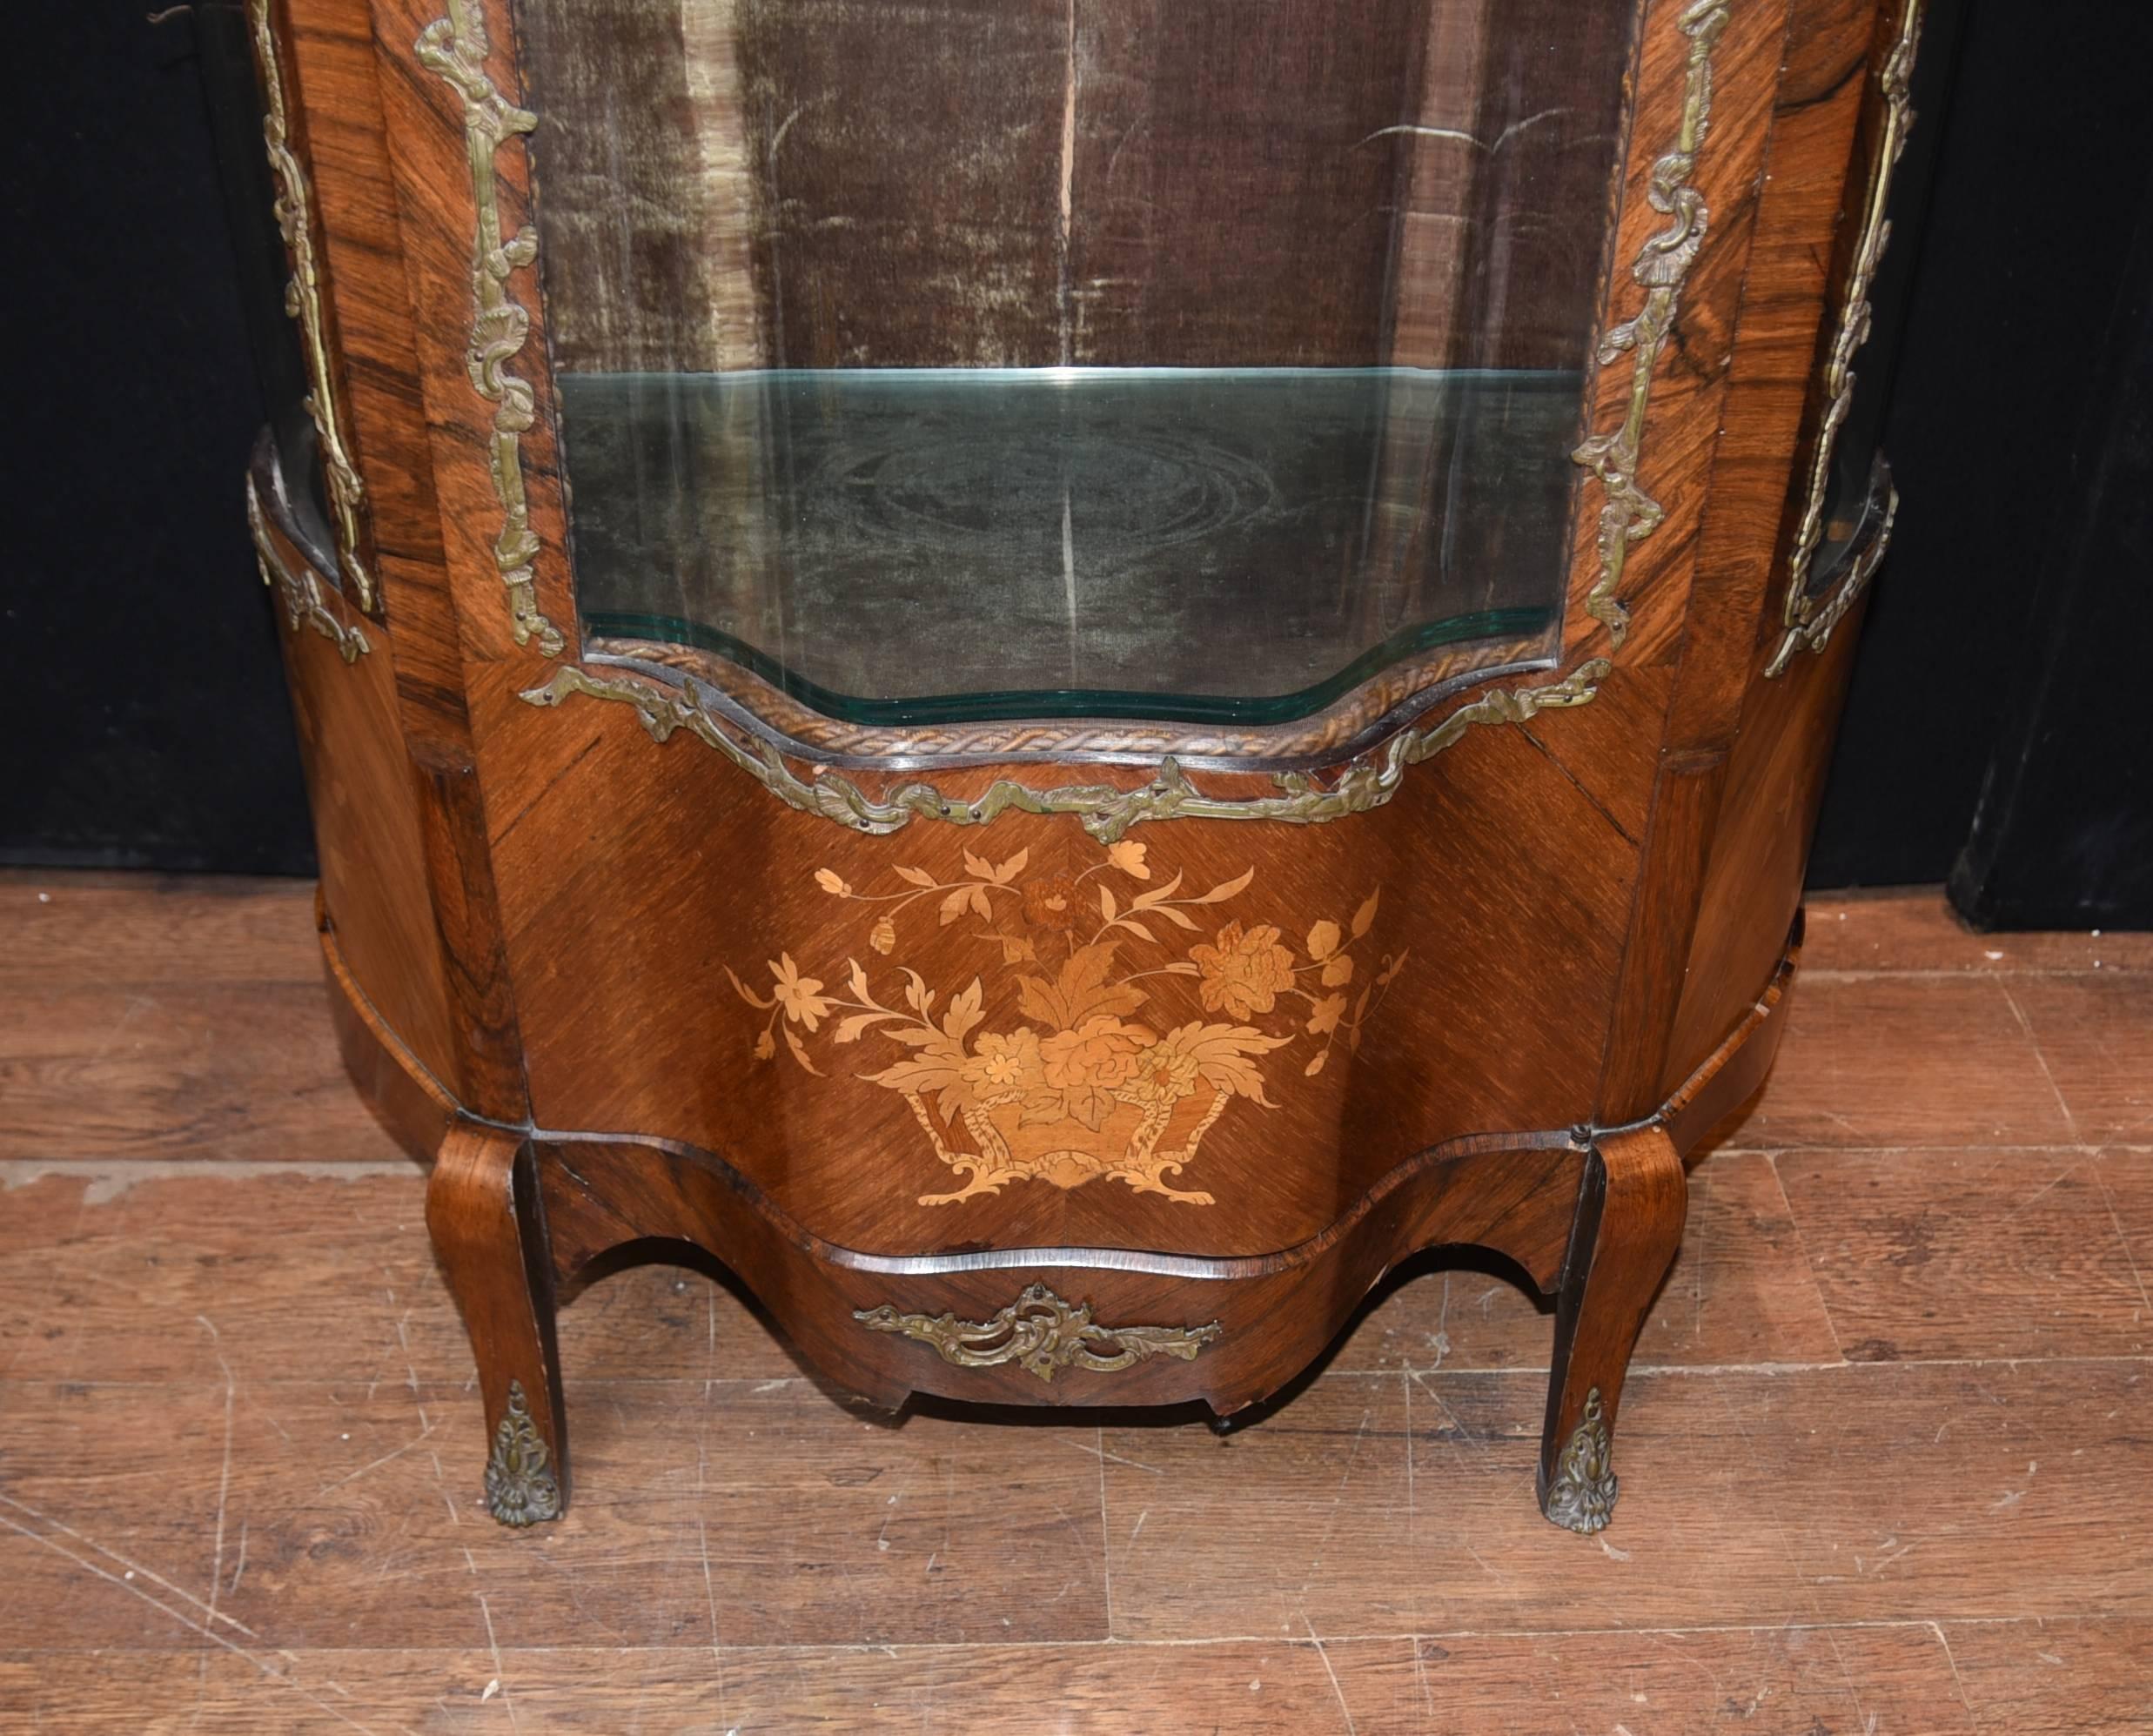 Gorgeous French antique Empire display cabinet
Great look to this piece, handcrafted from kingwood 
Intricate marquetry inlay work to the front with floral spray
Great piece for displaying decorative pieces
Purchased from a dealer on Marche